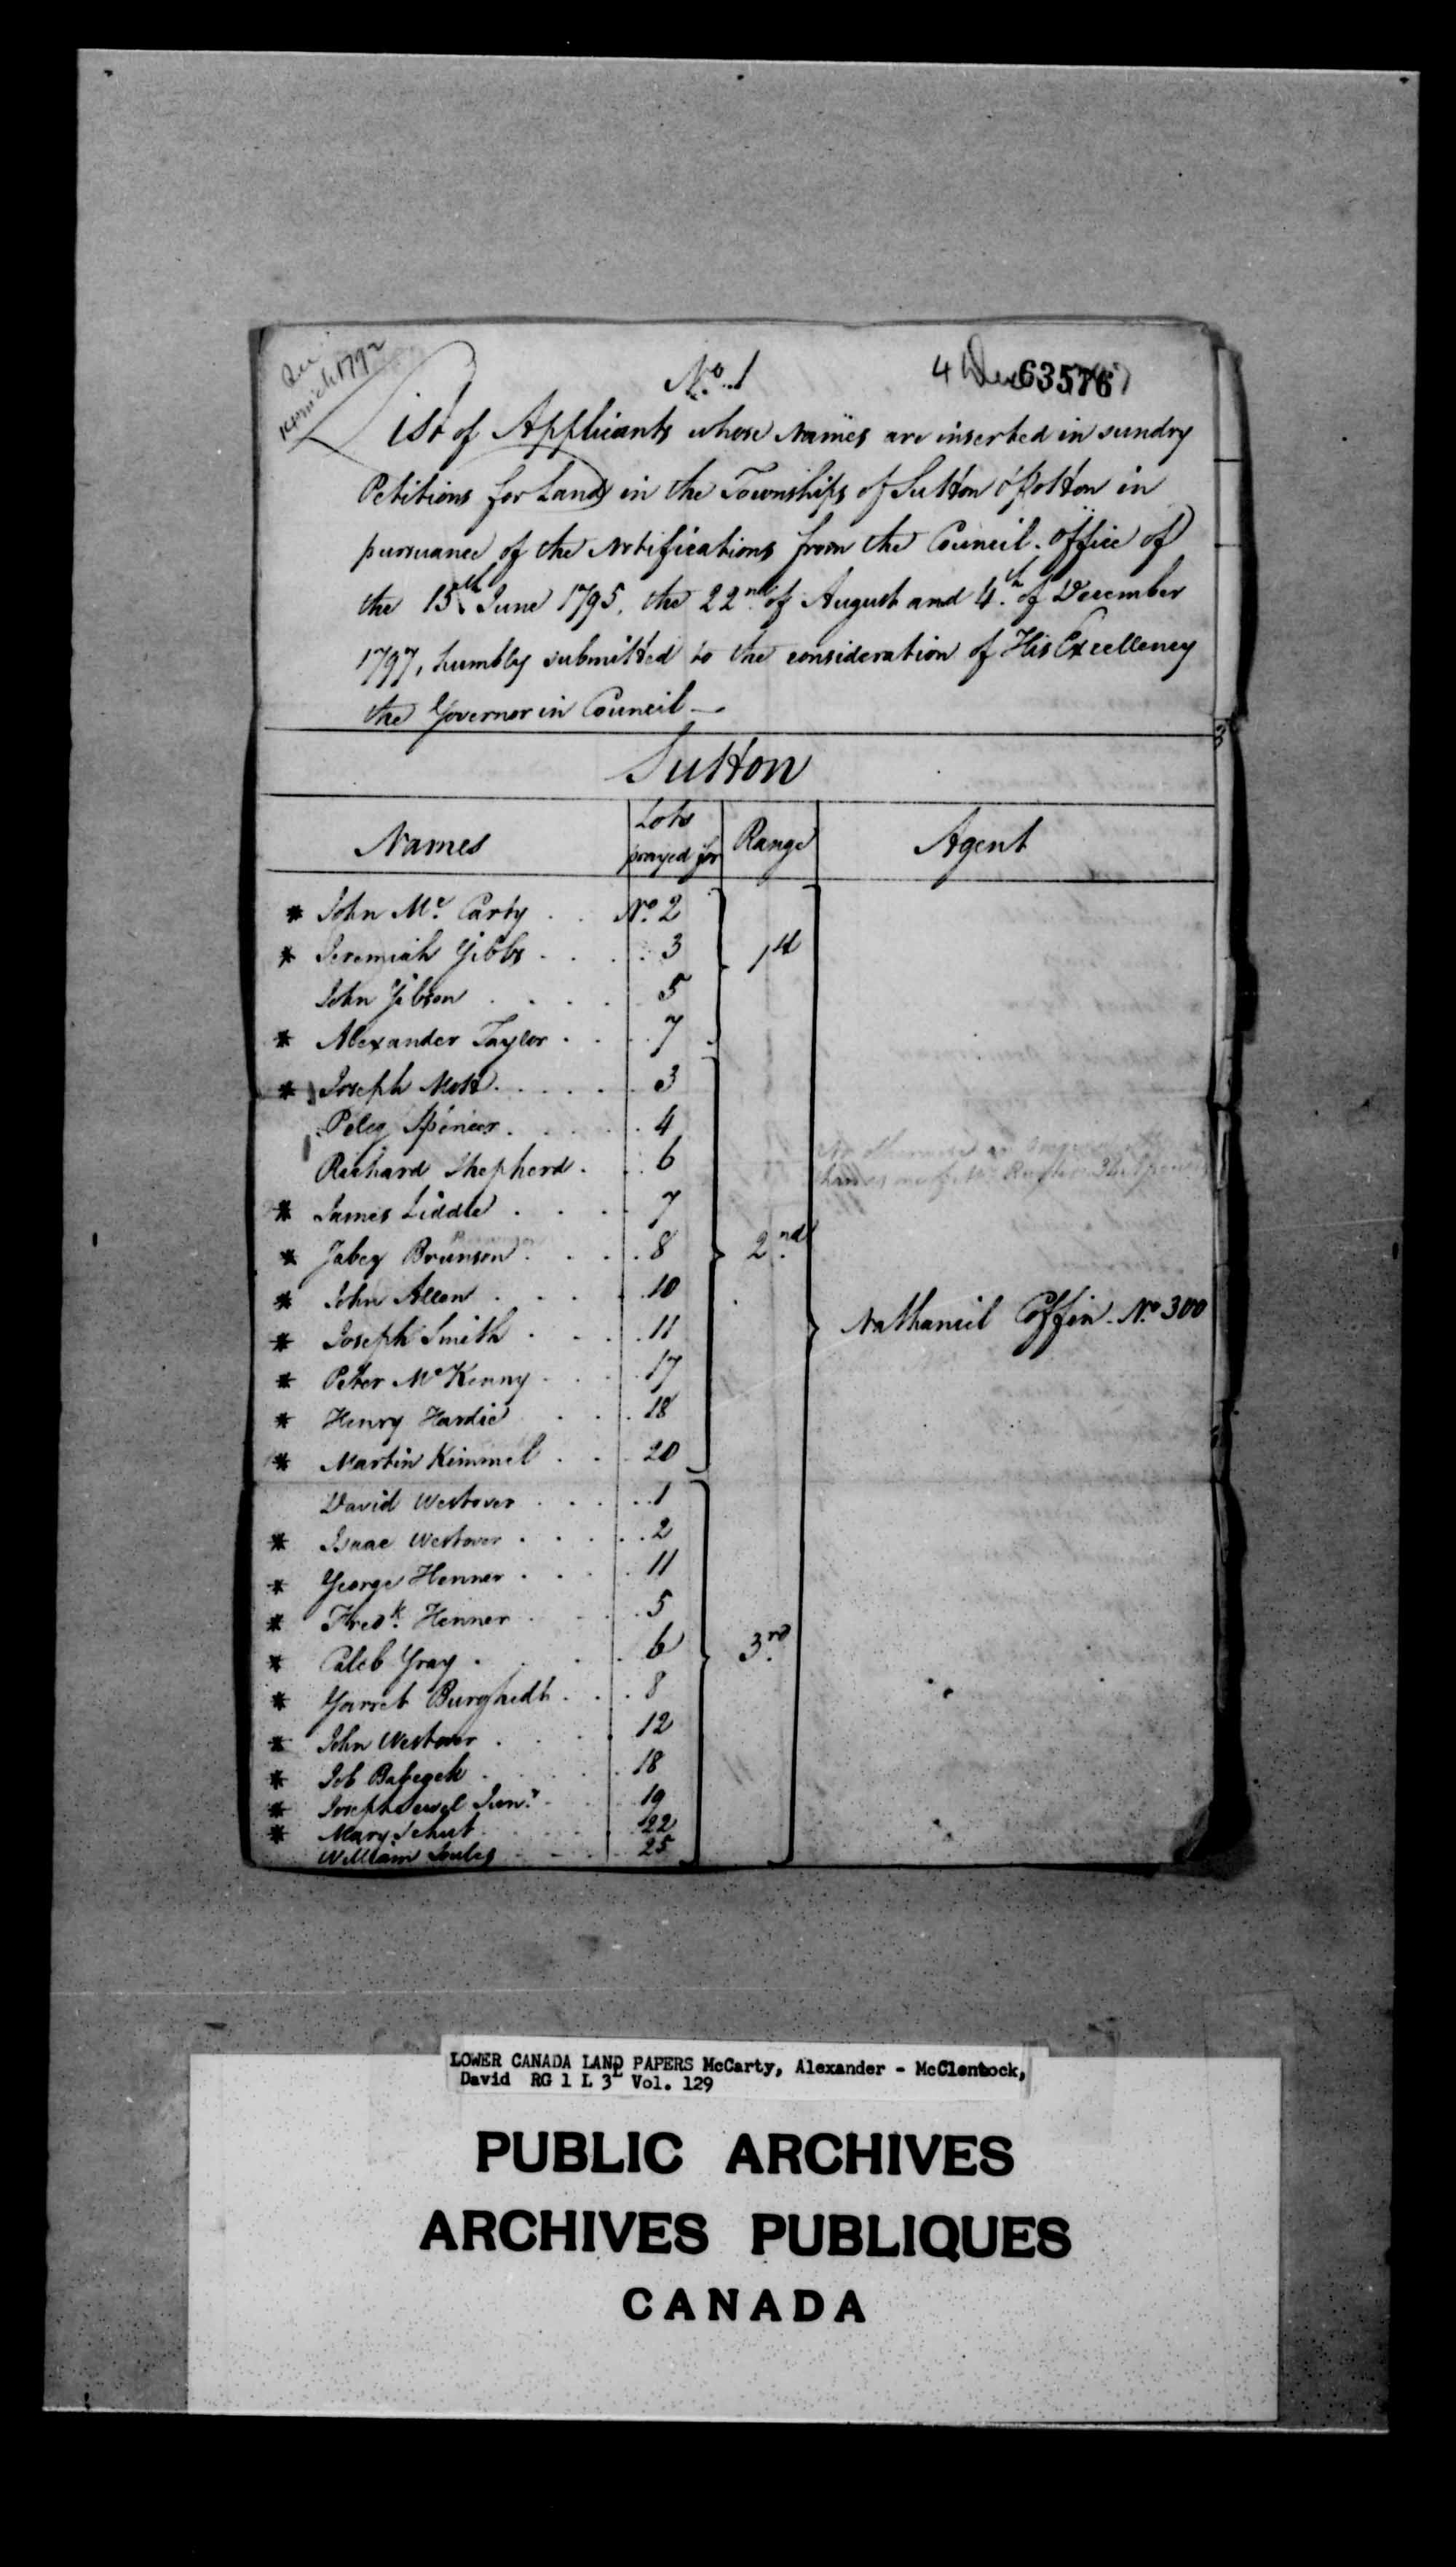 Digitized page of  for Image No.: e008708625